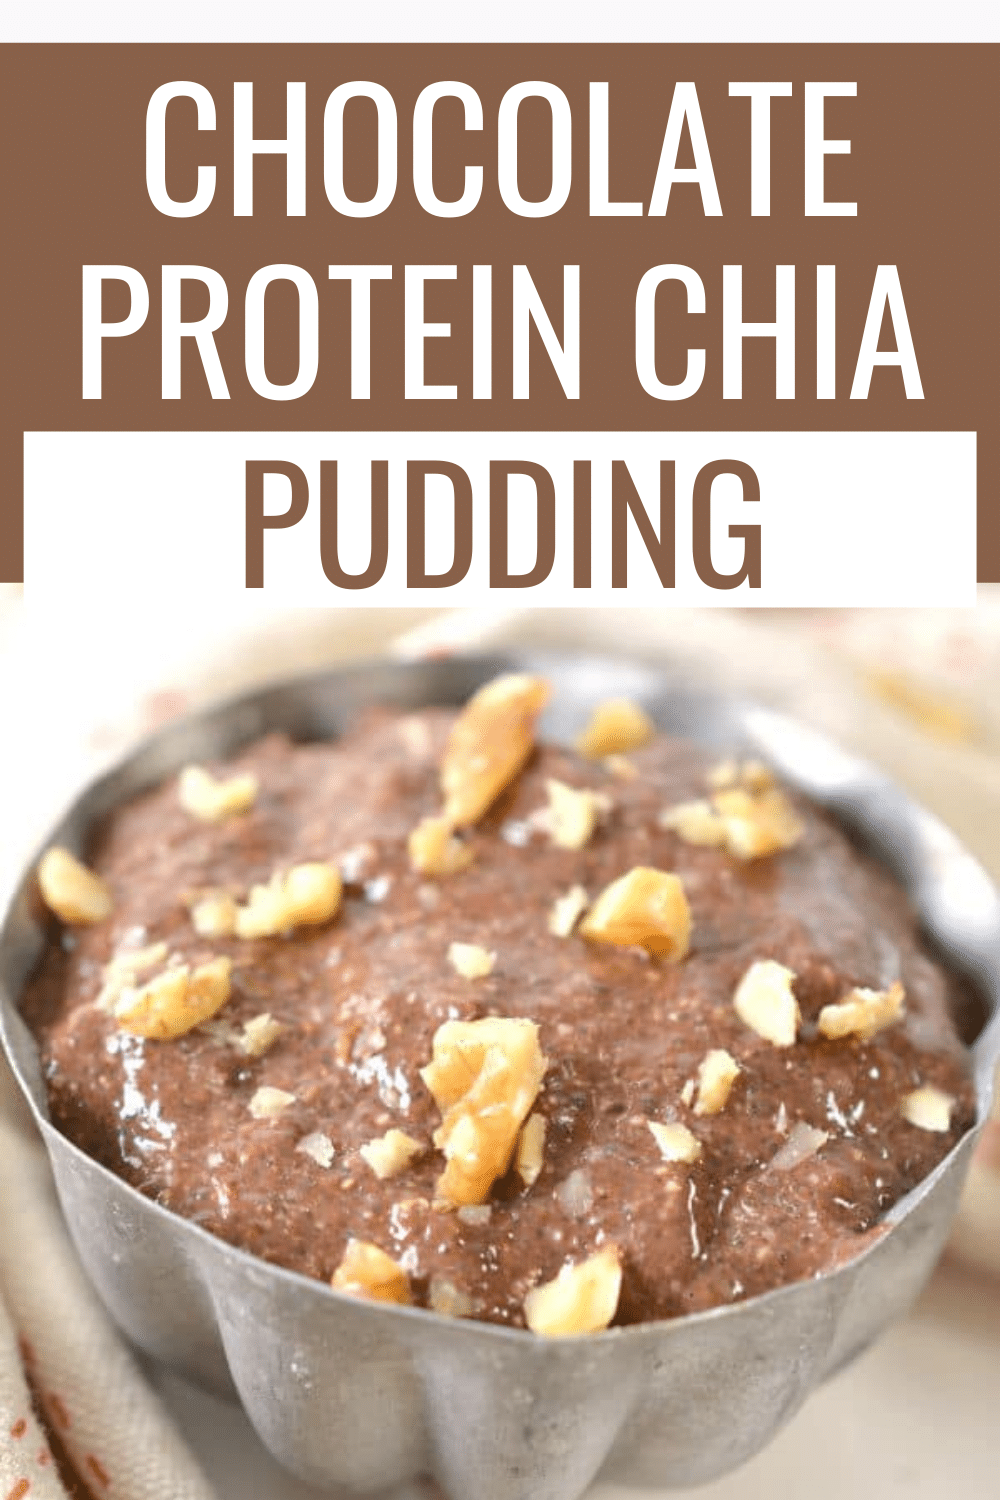 Chocolate Protein Chia Pudding is packed with extra protein and the goodness from chia seeds. This easy pudding will become a favorite breakfast or snack. #pudding #chocolate #chiaseeds via @wondermomwannab